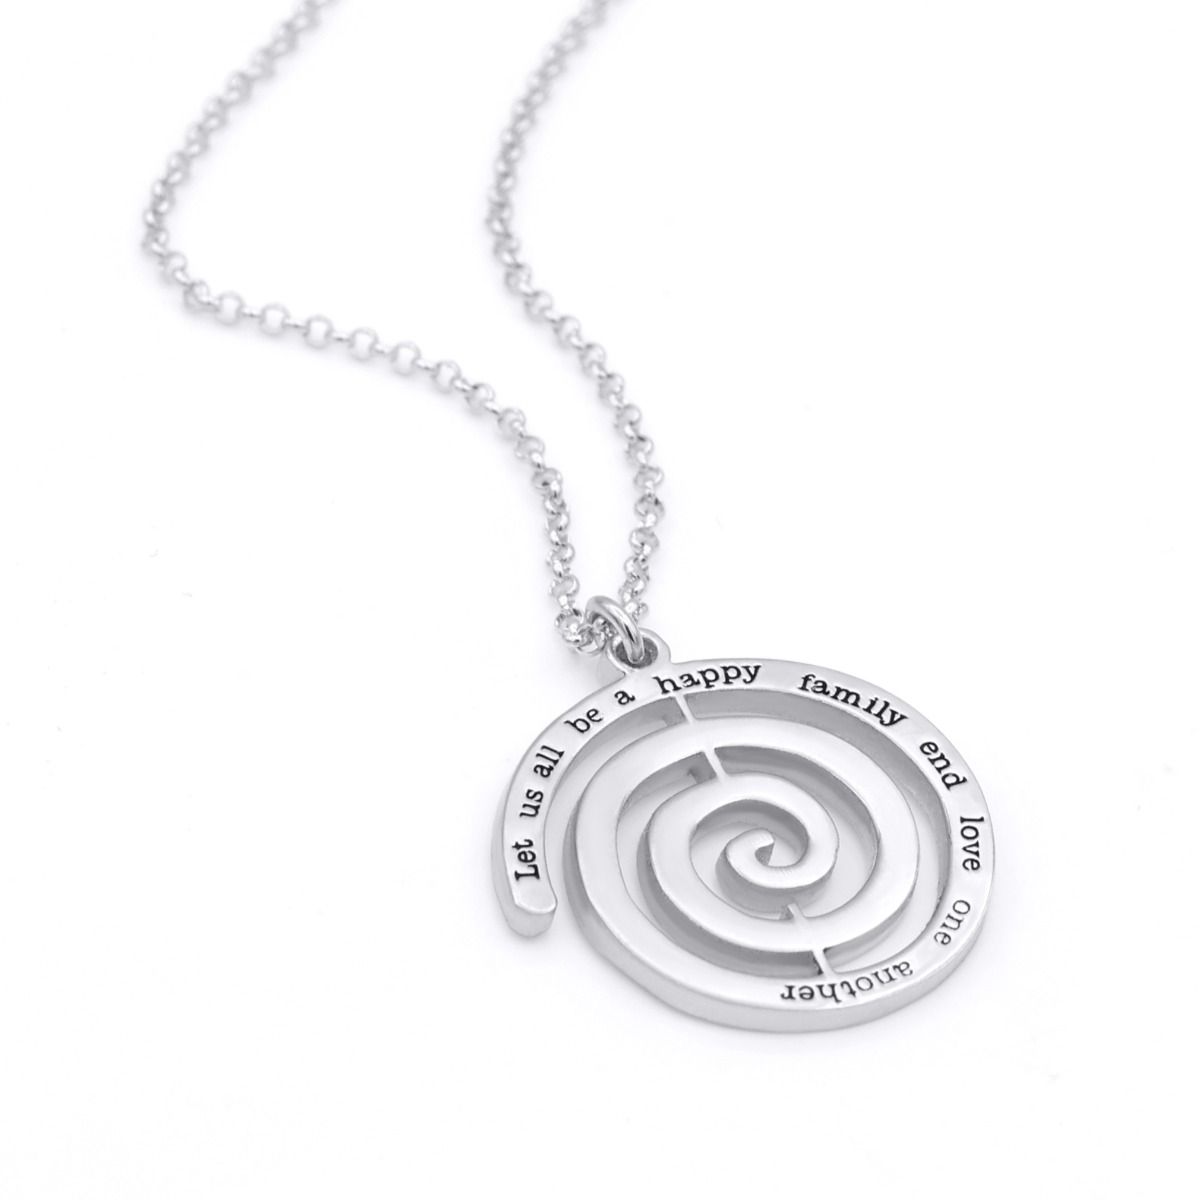 Spiral Necklace, Black Necklace, Necklaces for Women, Statement